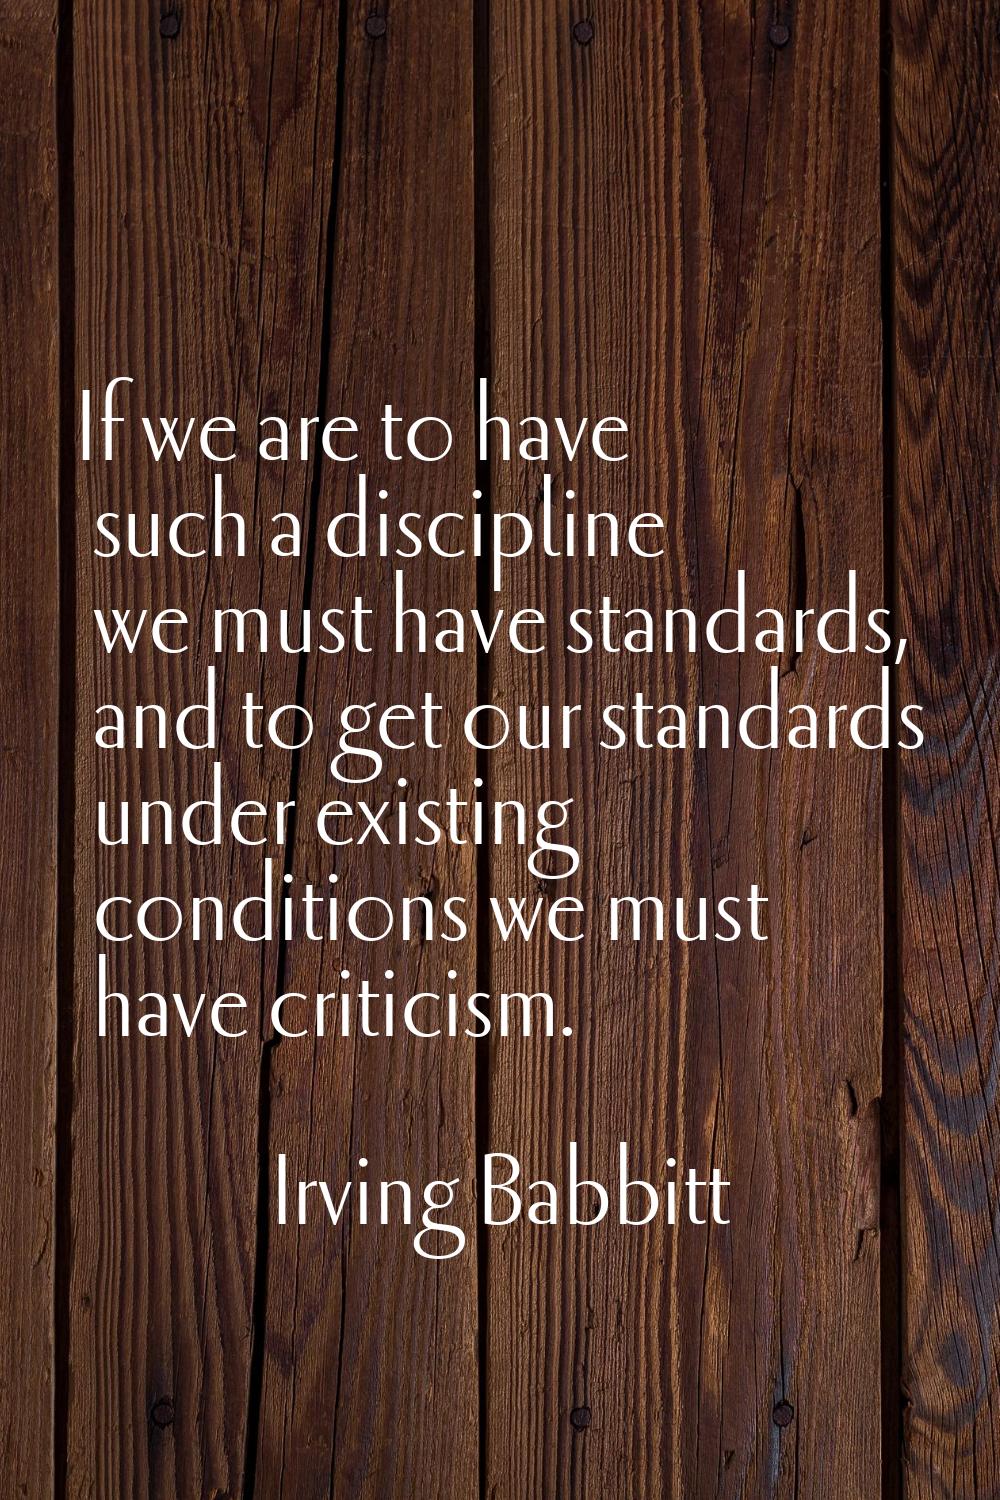 If we are to have such a discipline we must have standards, and to get our standards under existing